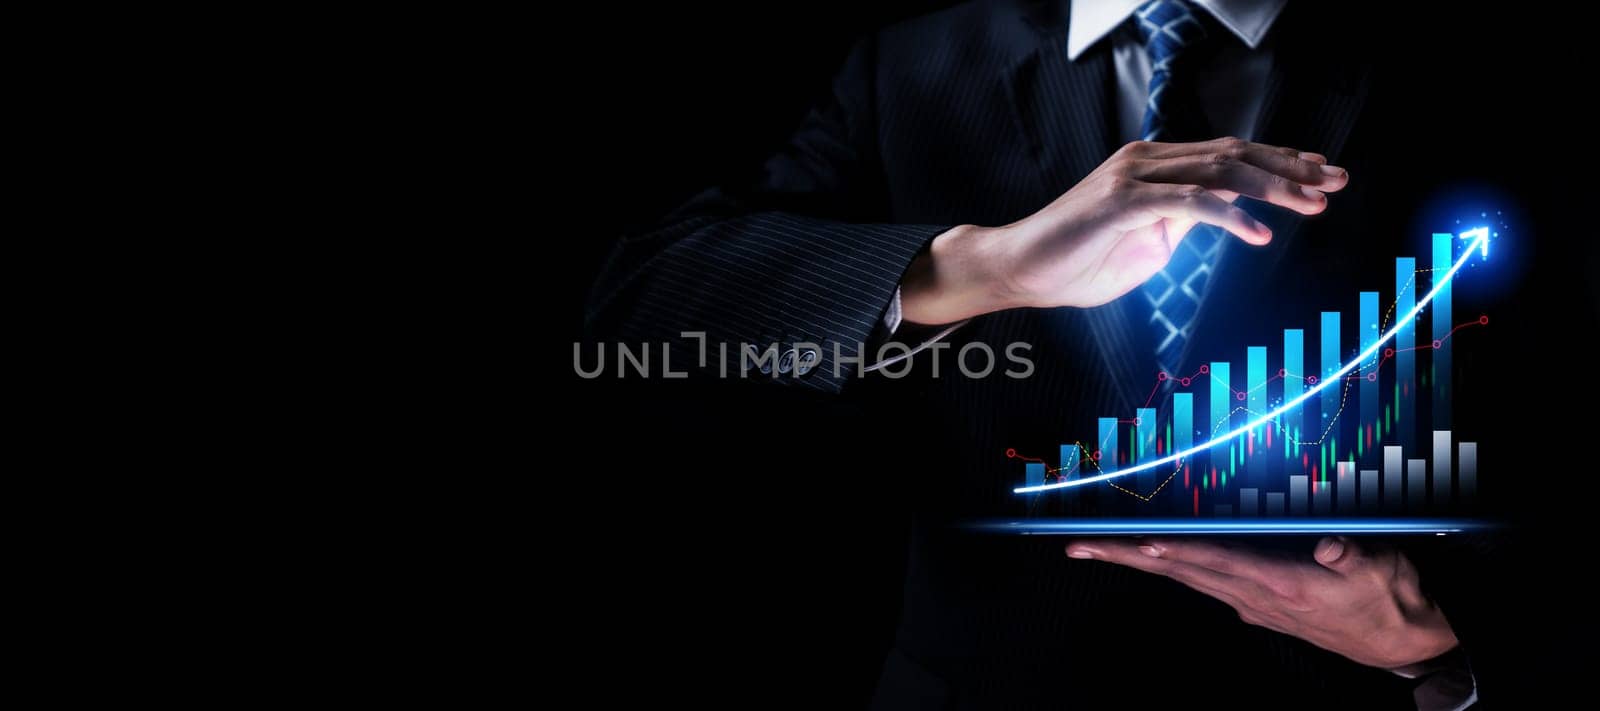 Businessman working with digital finance business graph of perceptive technology by biancoblue